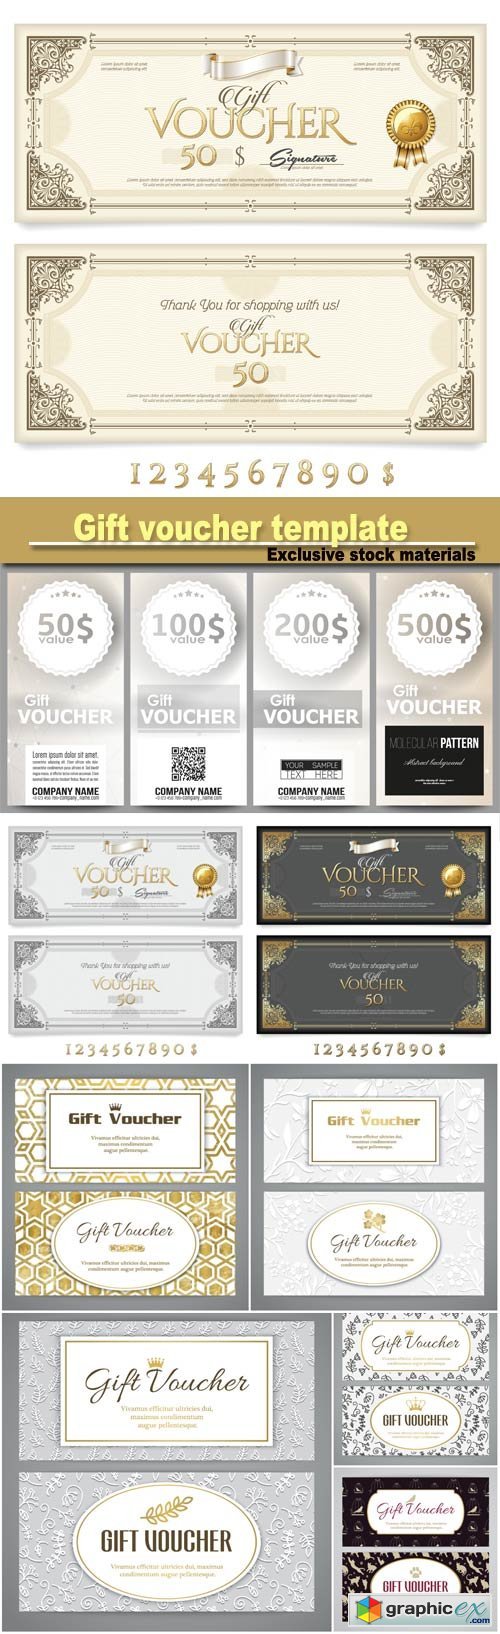 Gift voucher template with doodle pattern